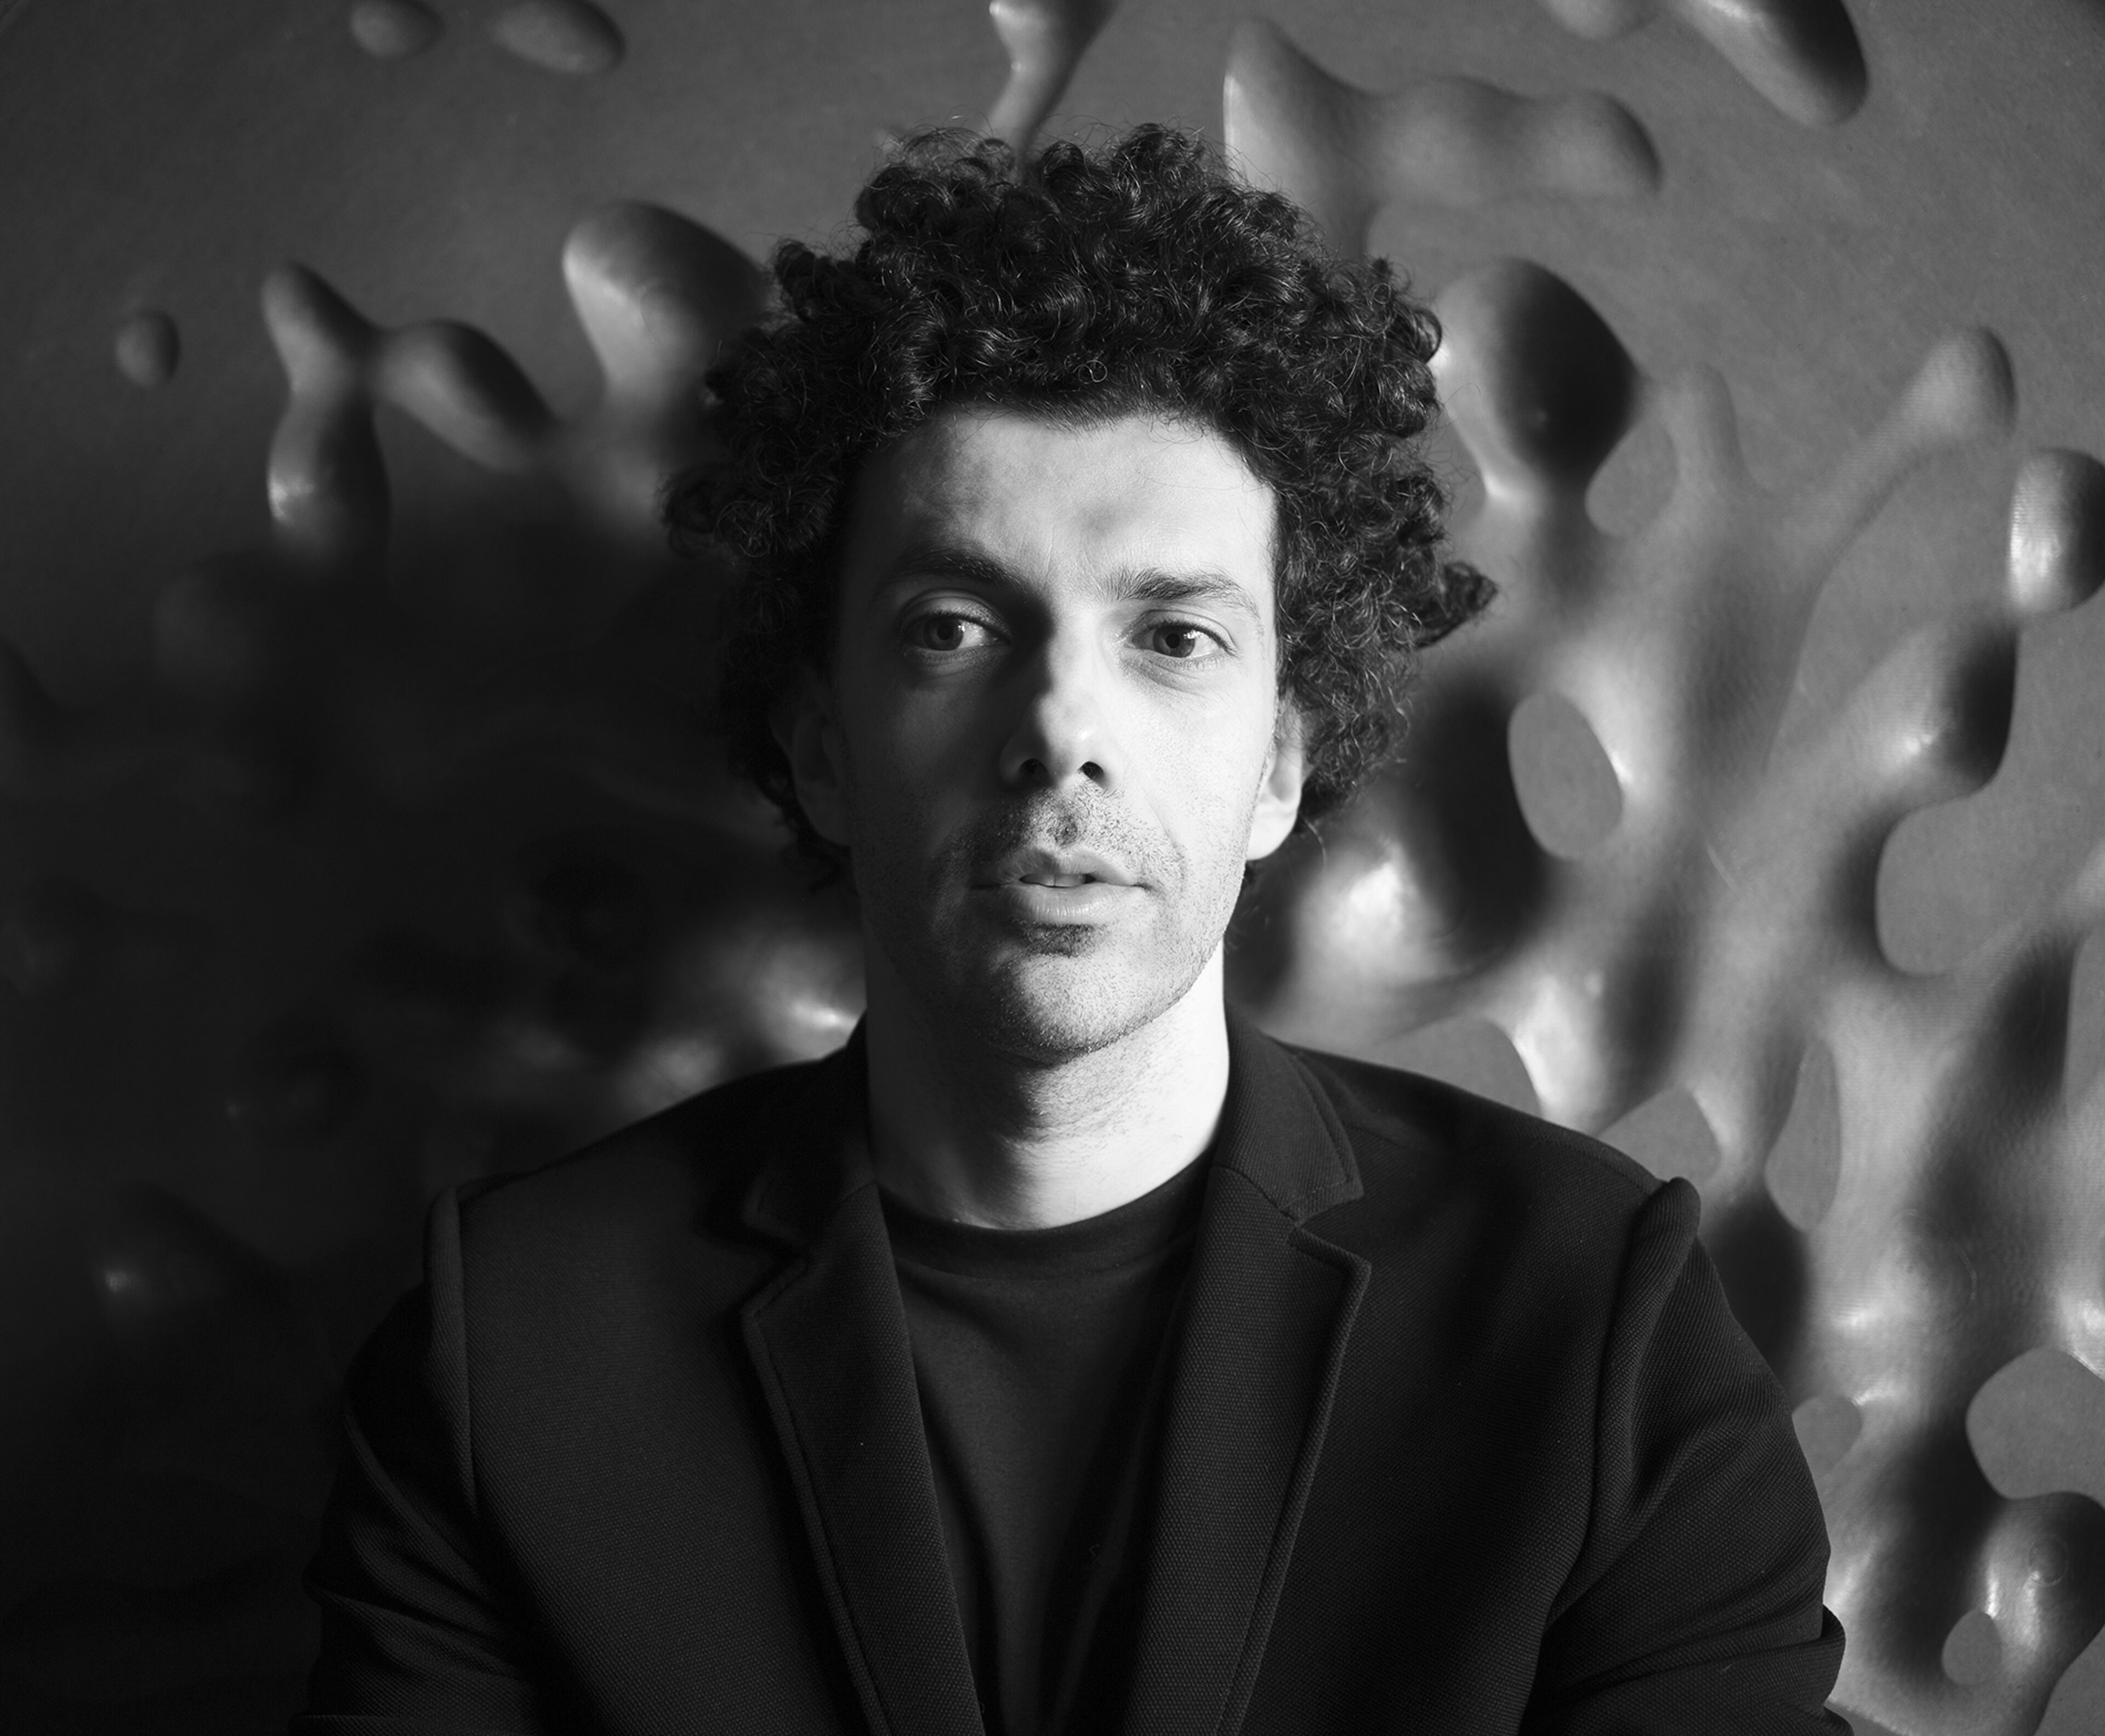 A monochrome portrait of a man with curly hair, gazing thoughtfully, set against a textured backdrop.